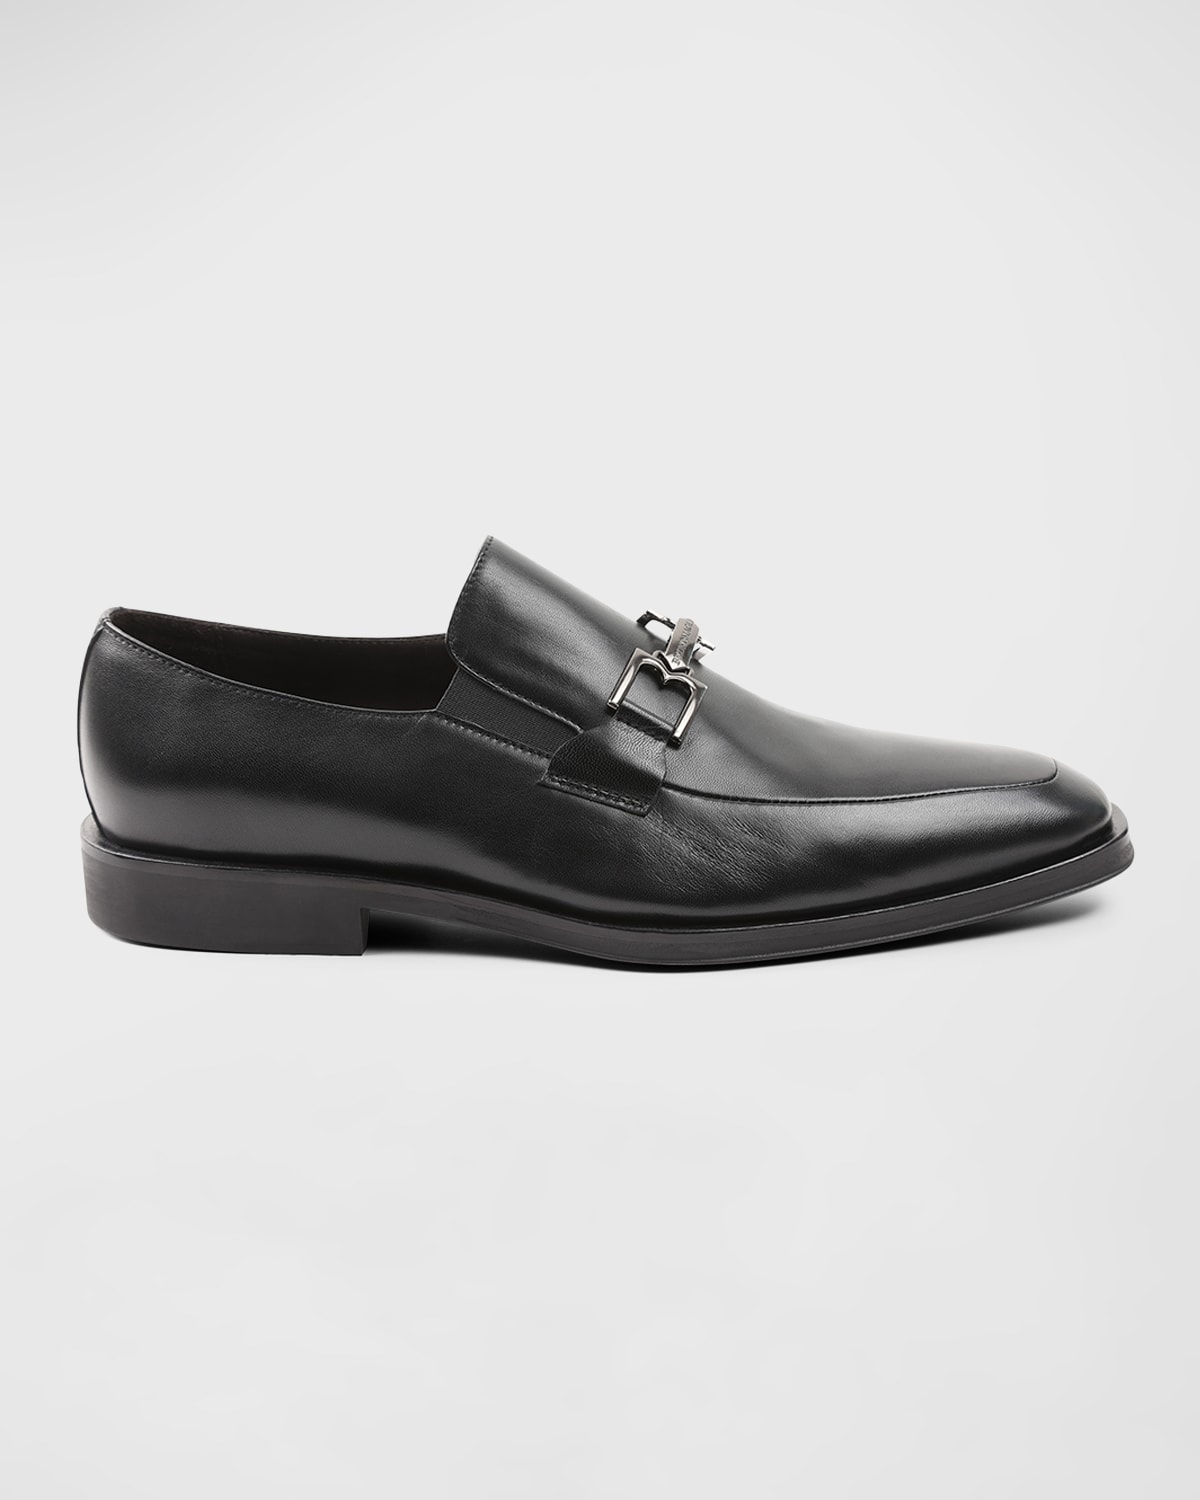 Men's Rialto Leather Slip-On Loafers